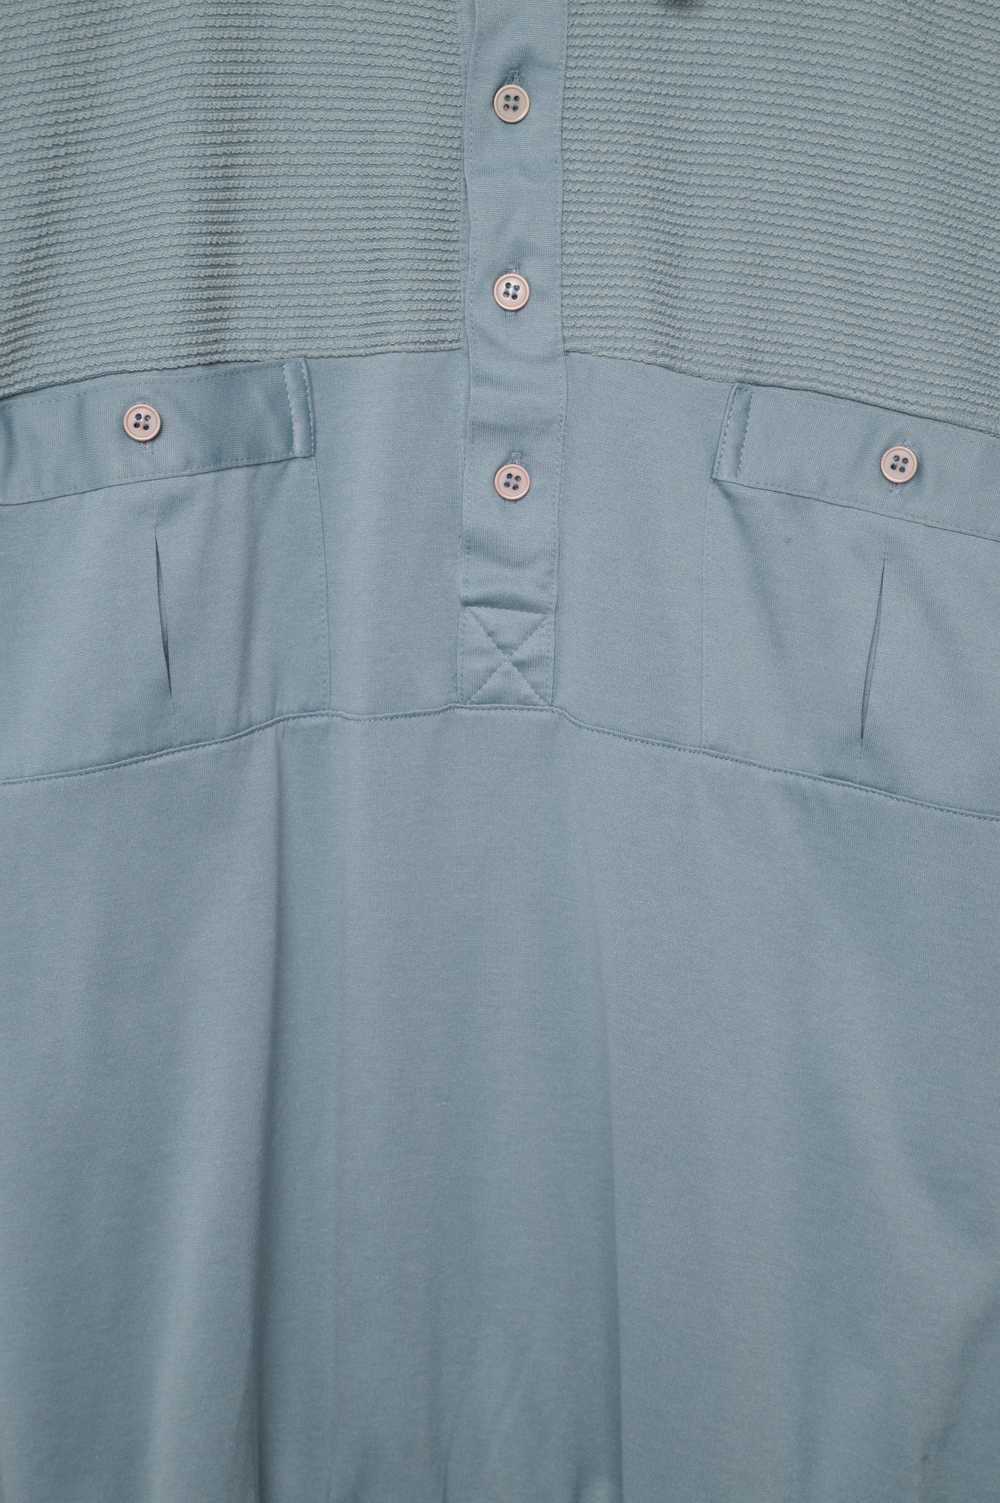 Teal Banded Polo - image 2